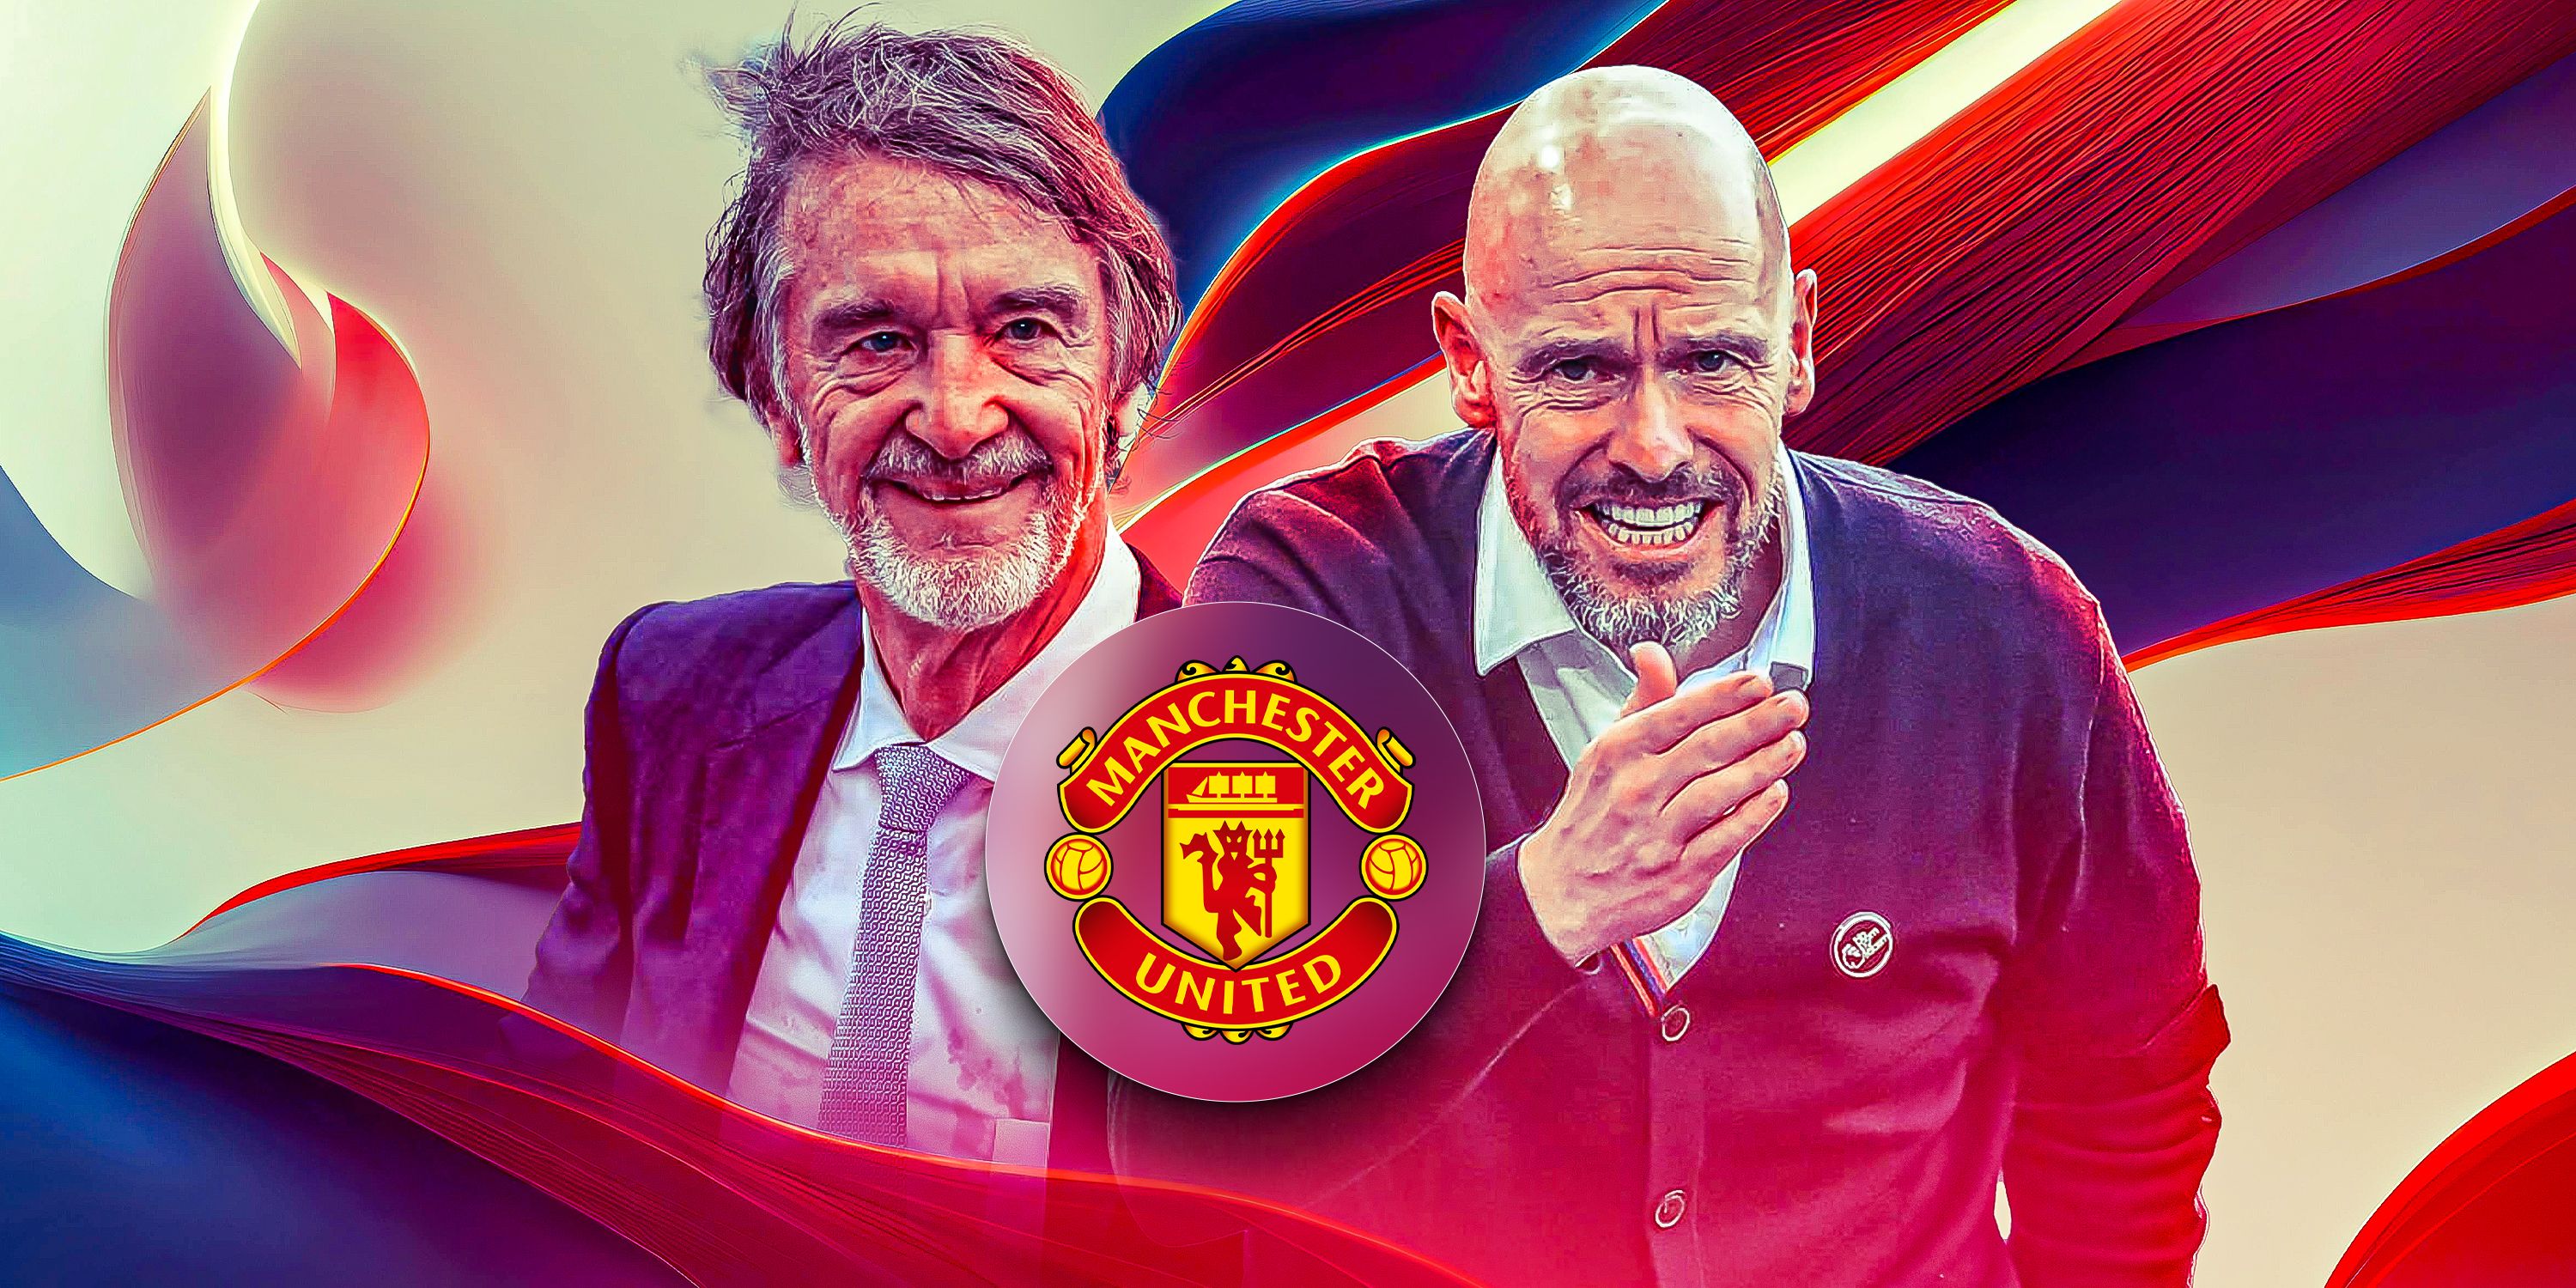 Manchester United co-owner Sir Jim Ratcliffe and boss Erik ten Hag watching on